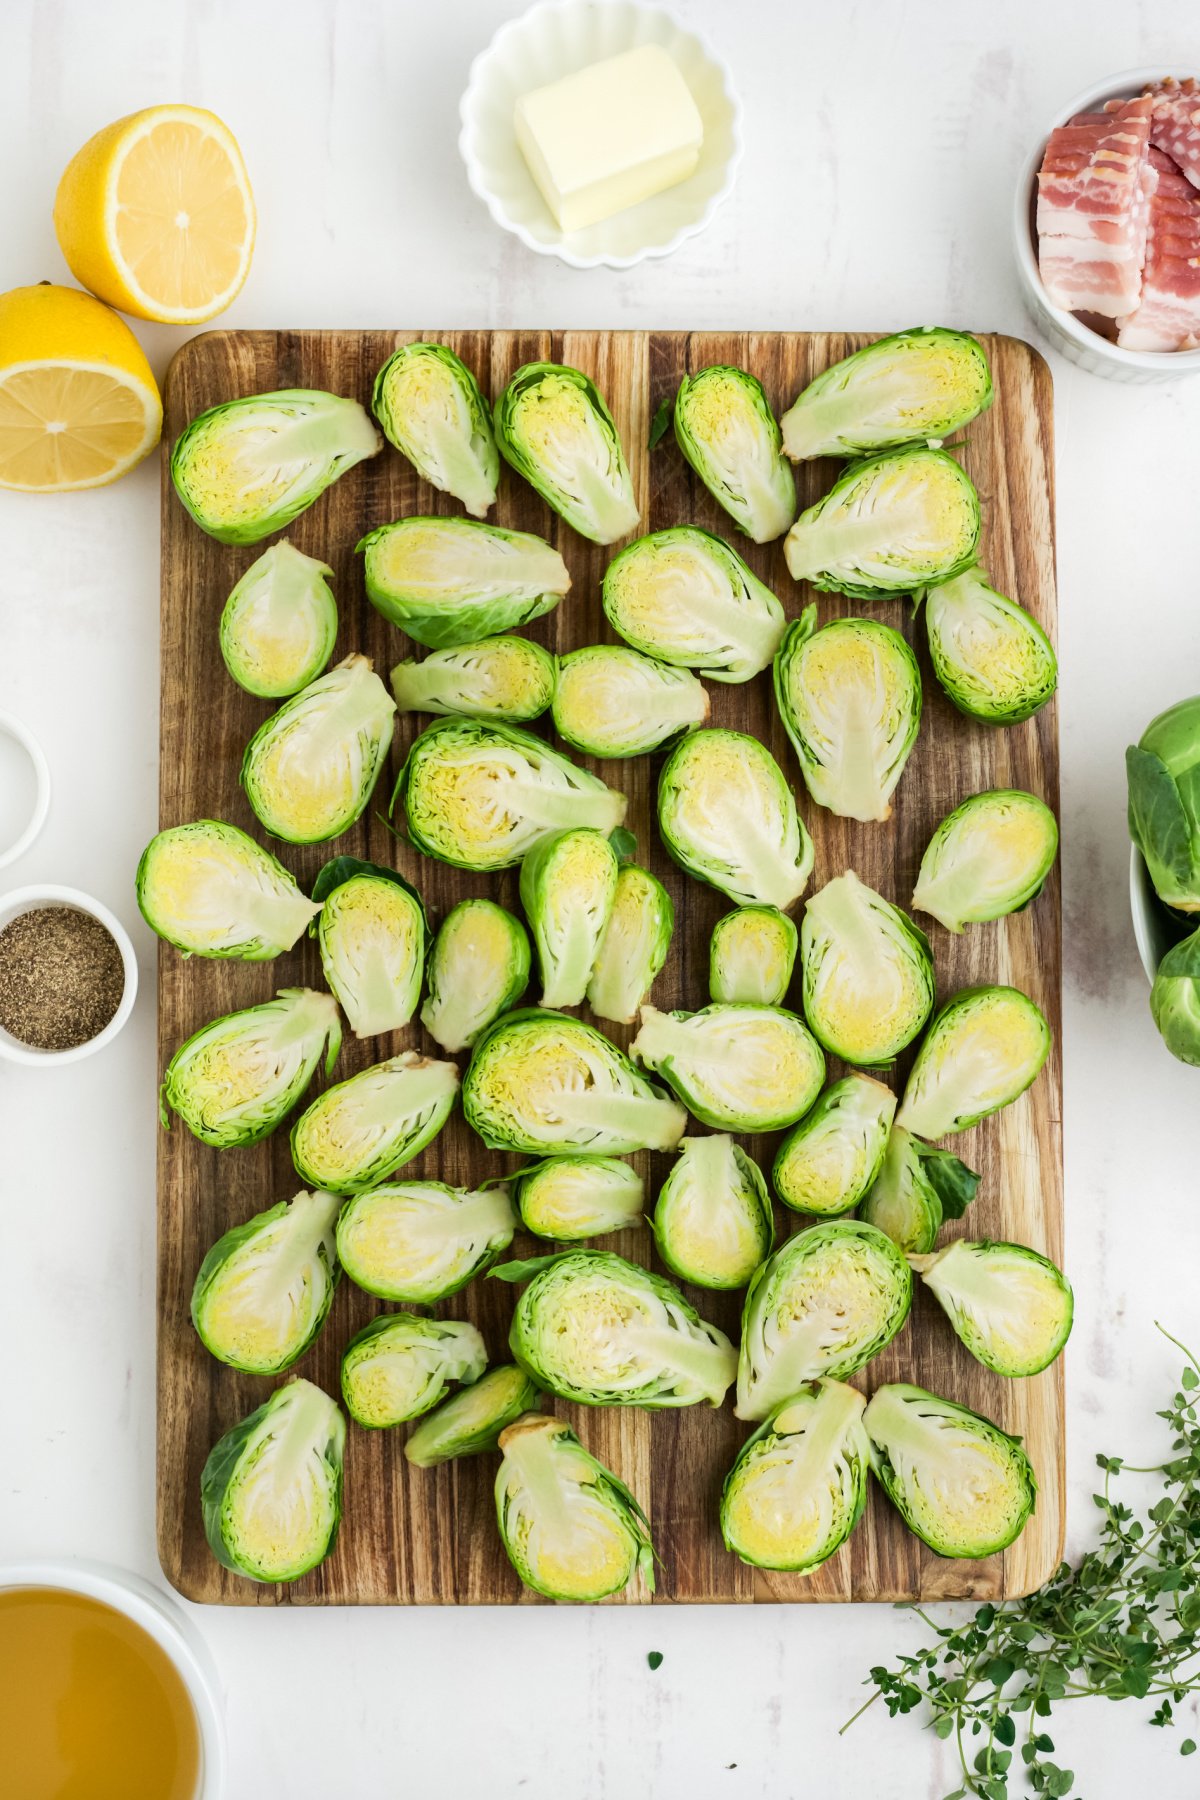 Brussels sprouts cut in half on a wooden cutting board.